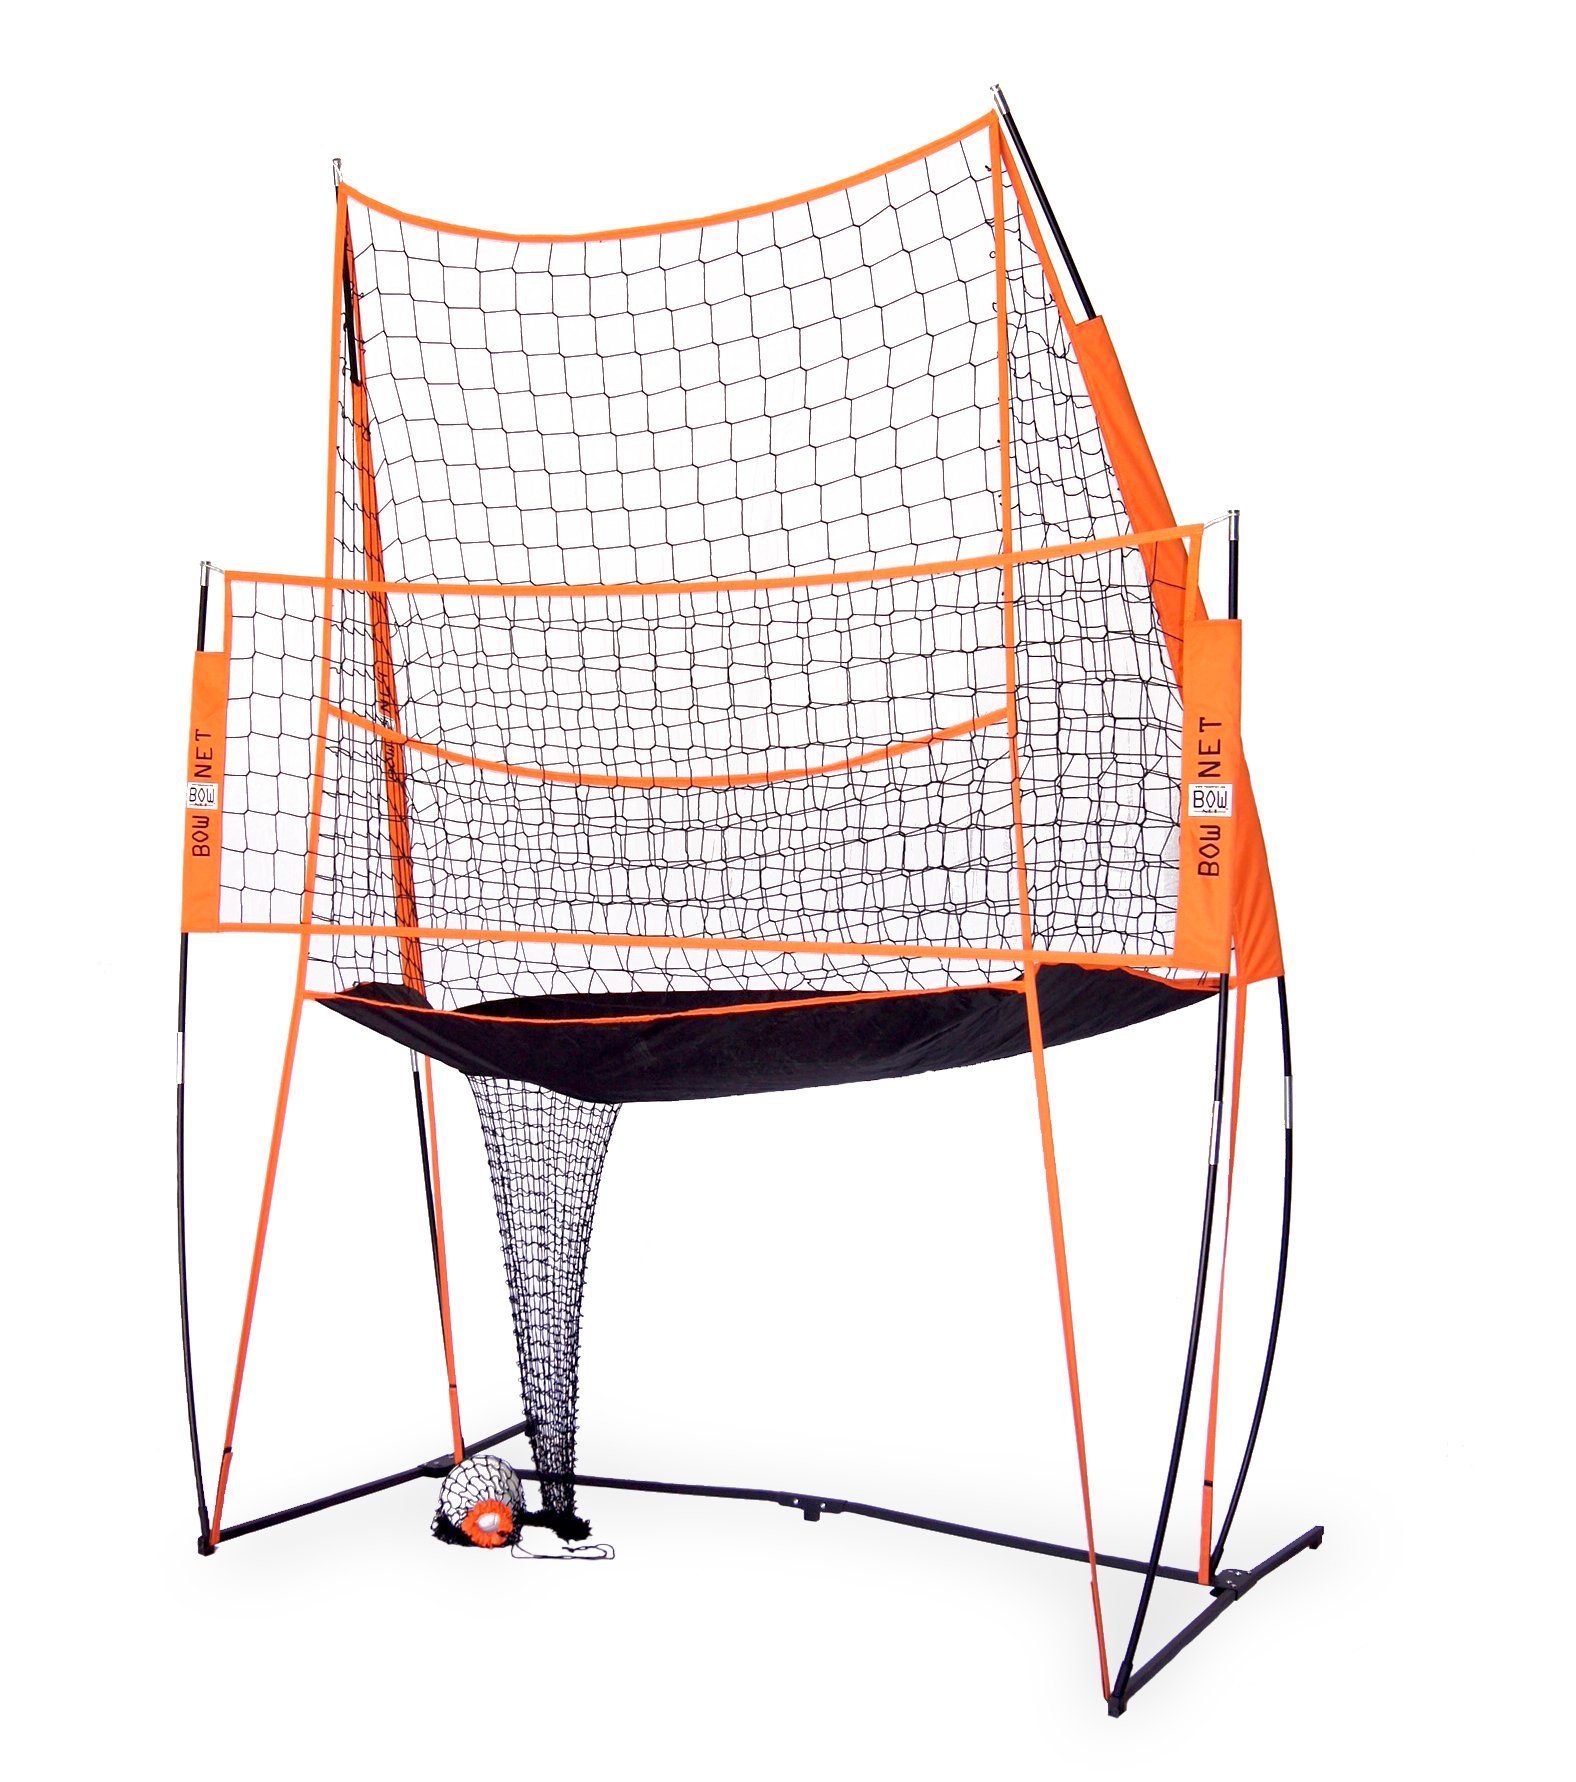 Details about   Bownet Volleyball Ball Caddy Portable 